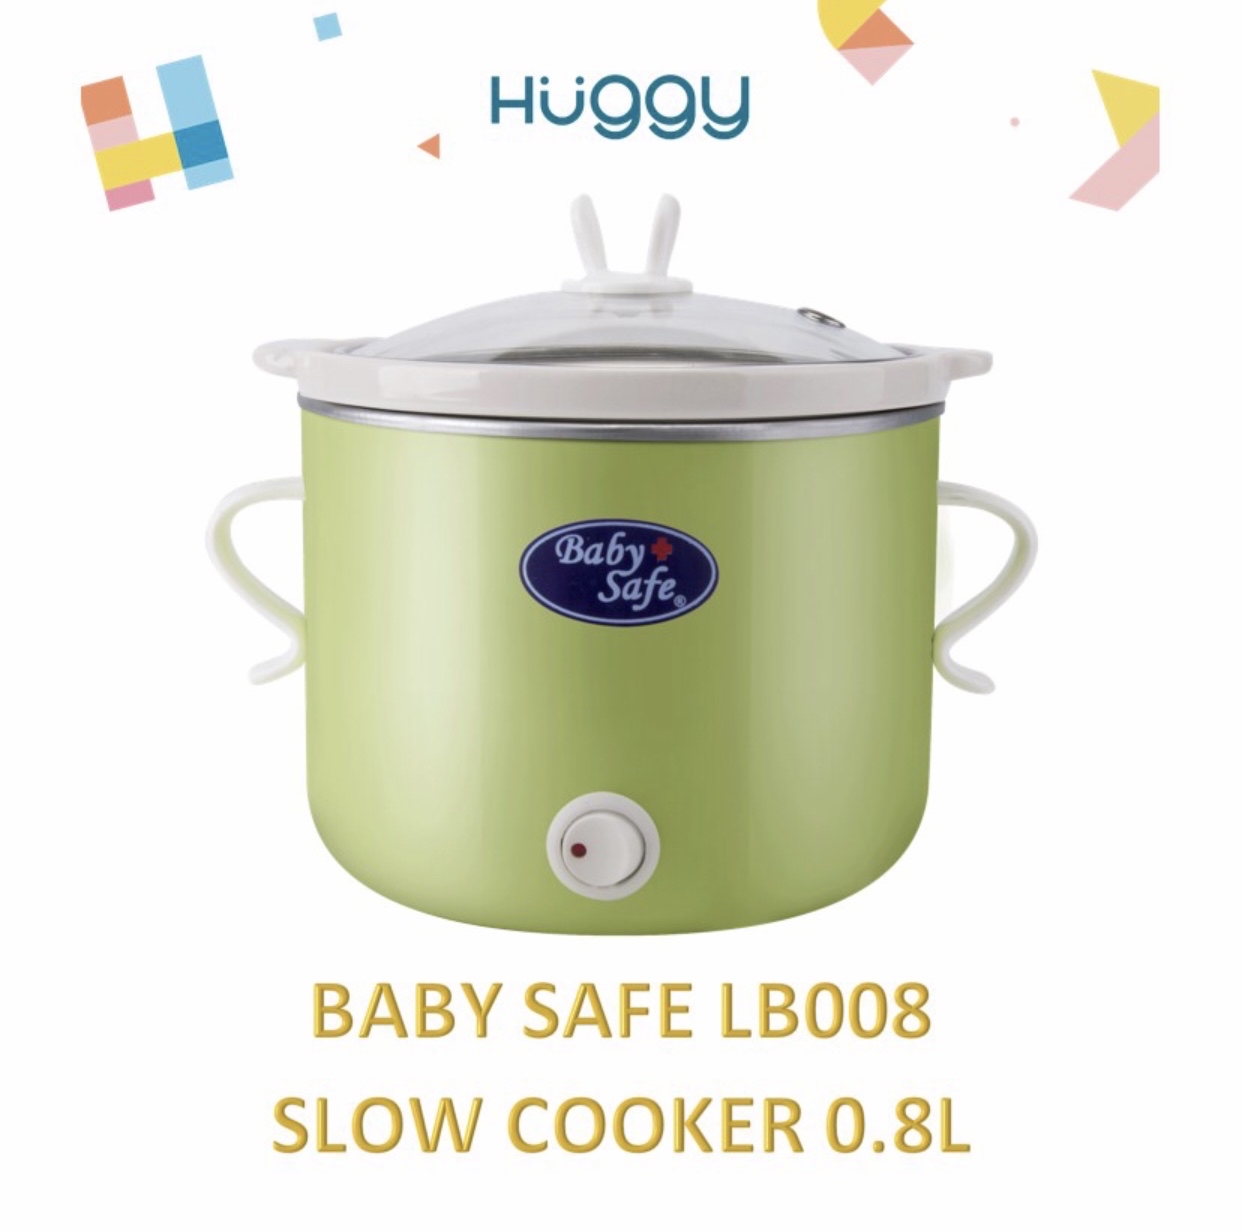 3.Baby safe slow cooker